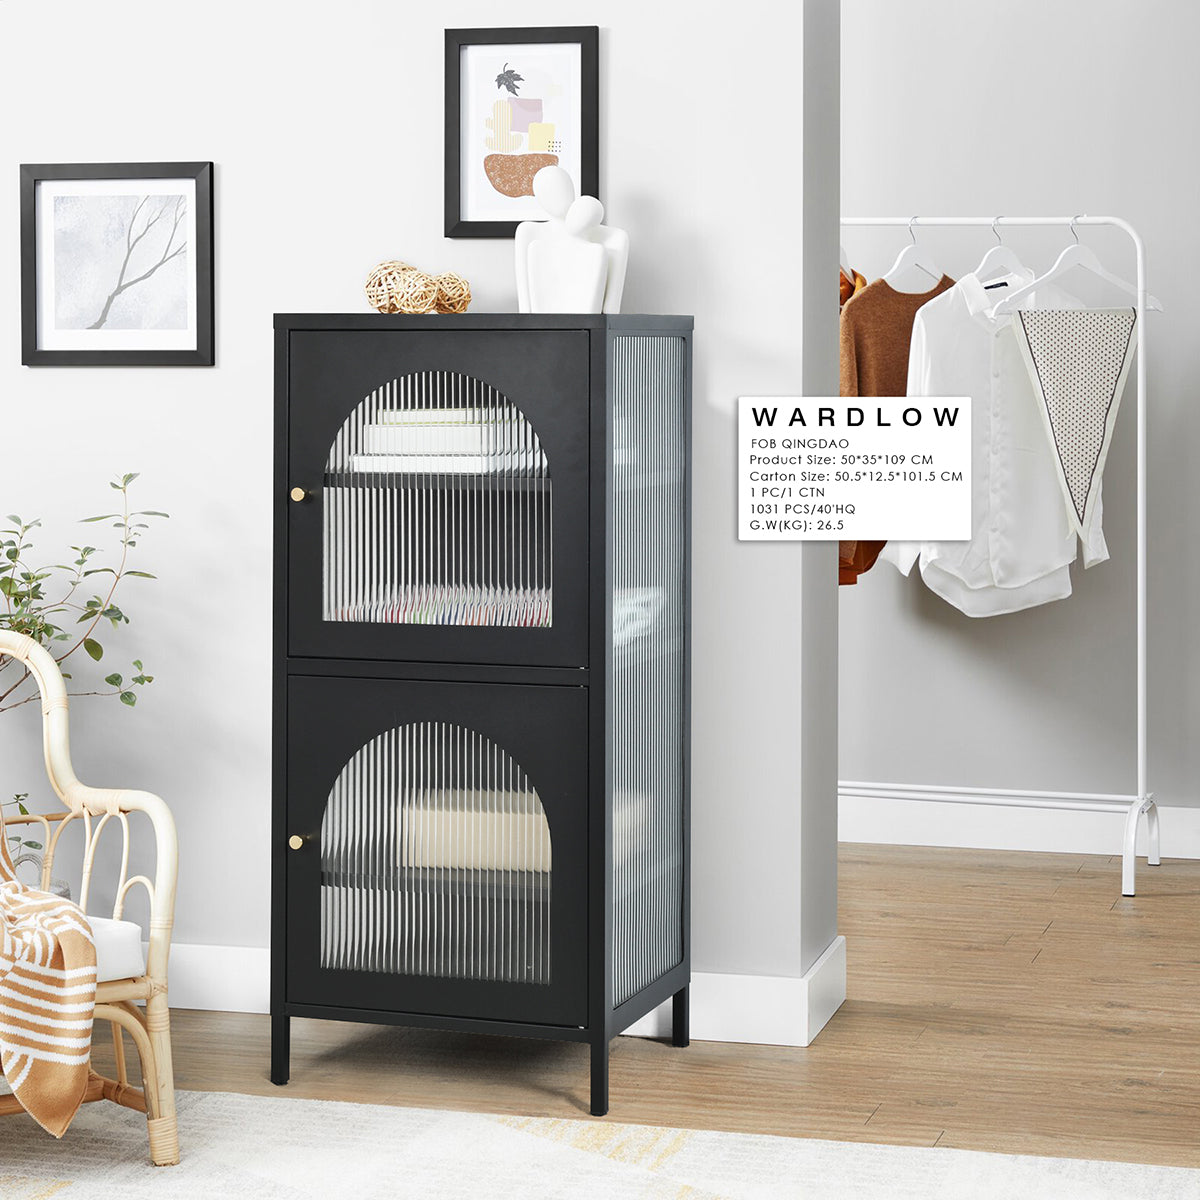 Chest of drawers/storage cabinet in black metal with industrial style shelf, 2 wired glass doors - WARDLOW